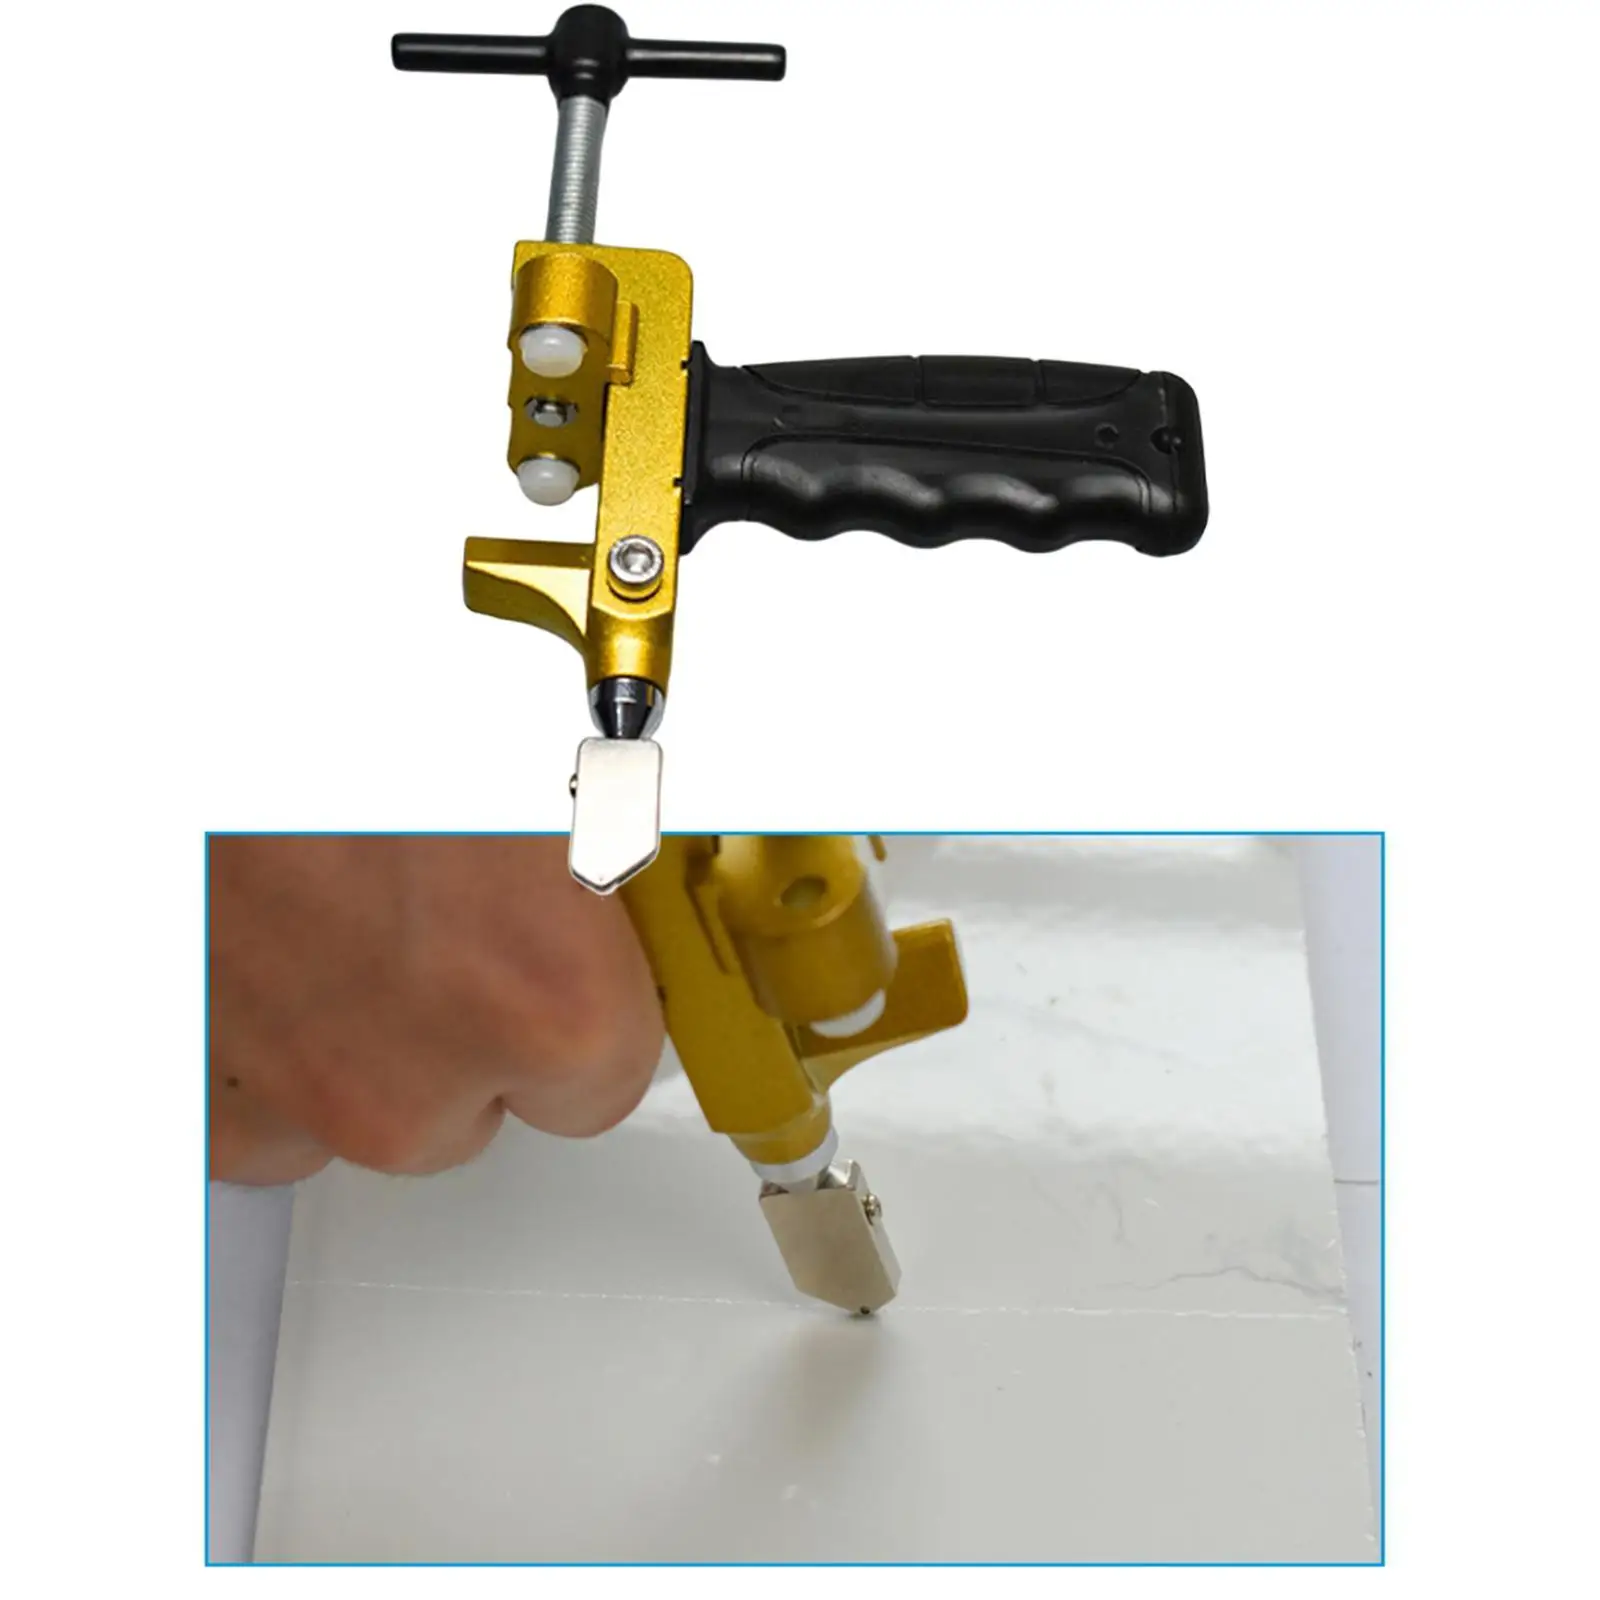 Alloy Tile Glass Cutter Manual Tile Mirrors Cutter Glass Cutting Kit Ceramic Tile Opener Tile Tools Multitools